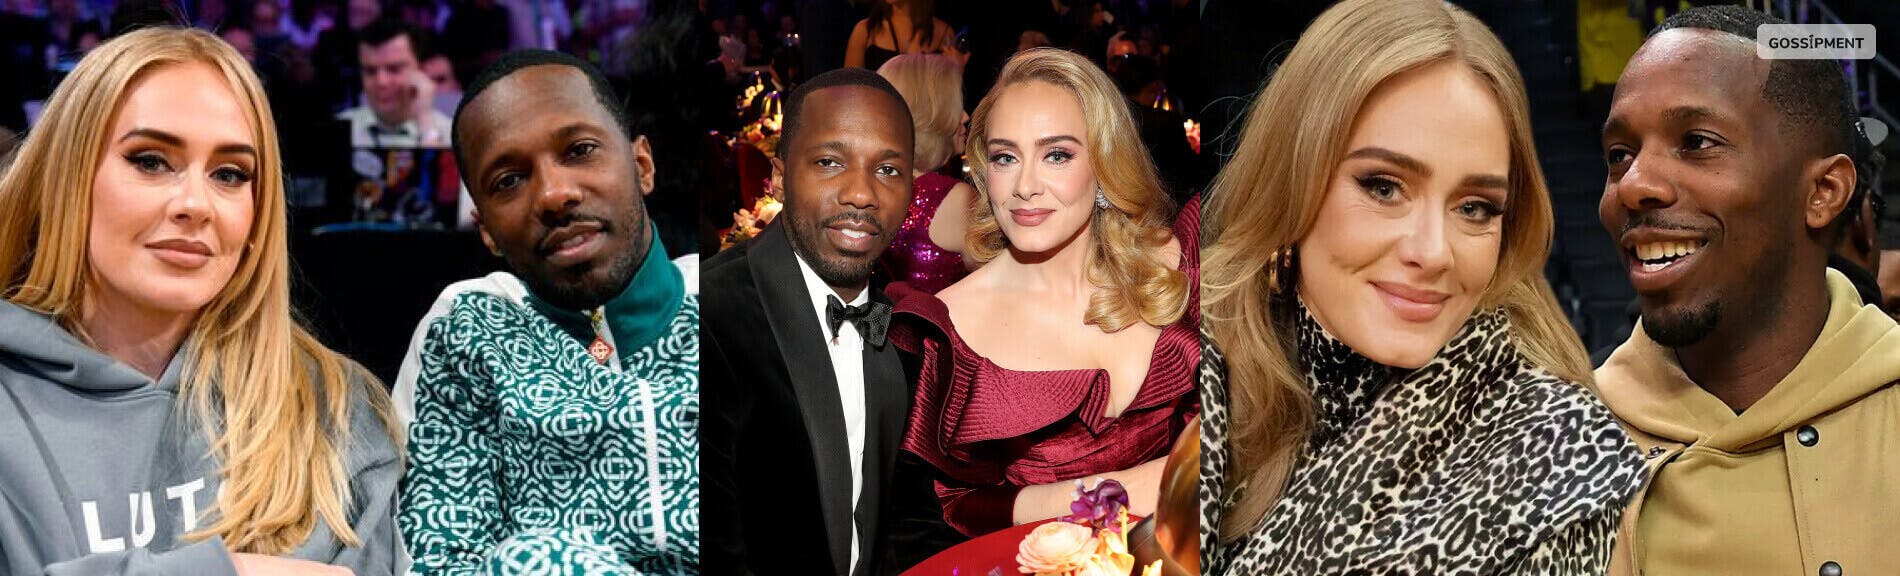 Cover Image for Marriage Rumors For Adele Again? The Singer Called Rich Paul ‘My Husband!’